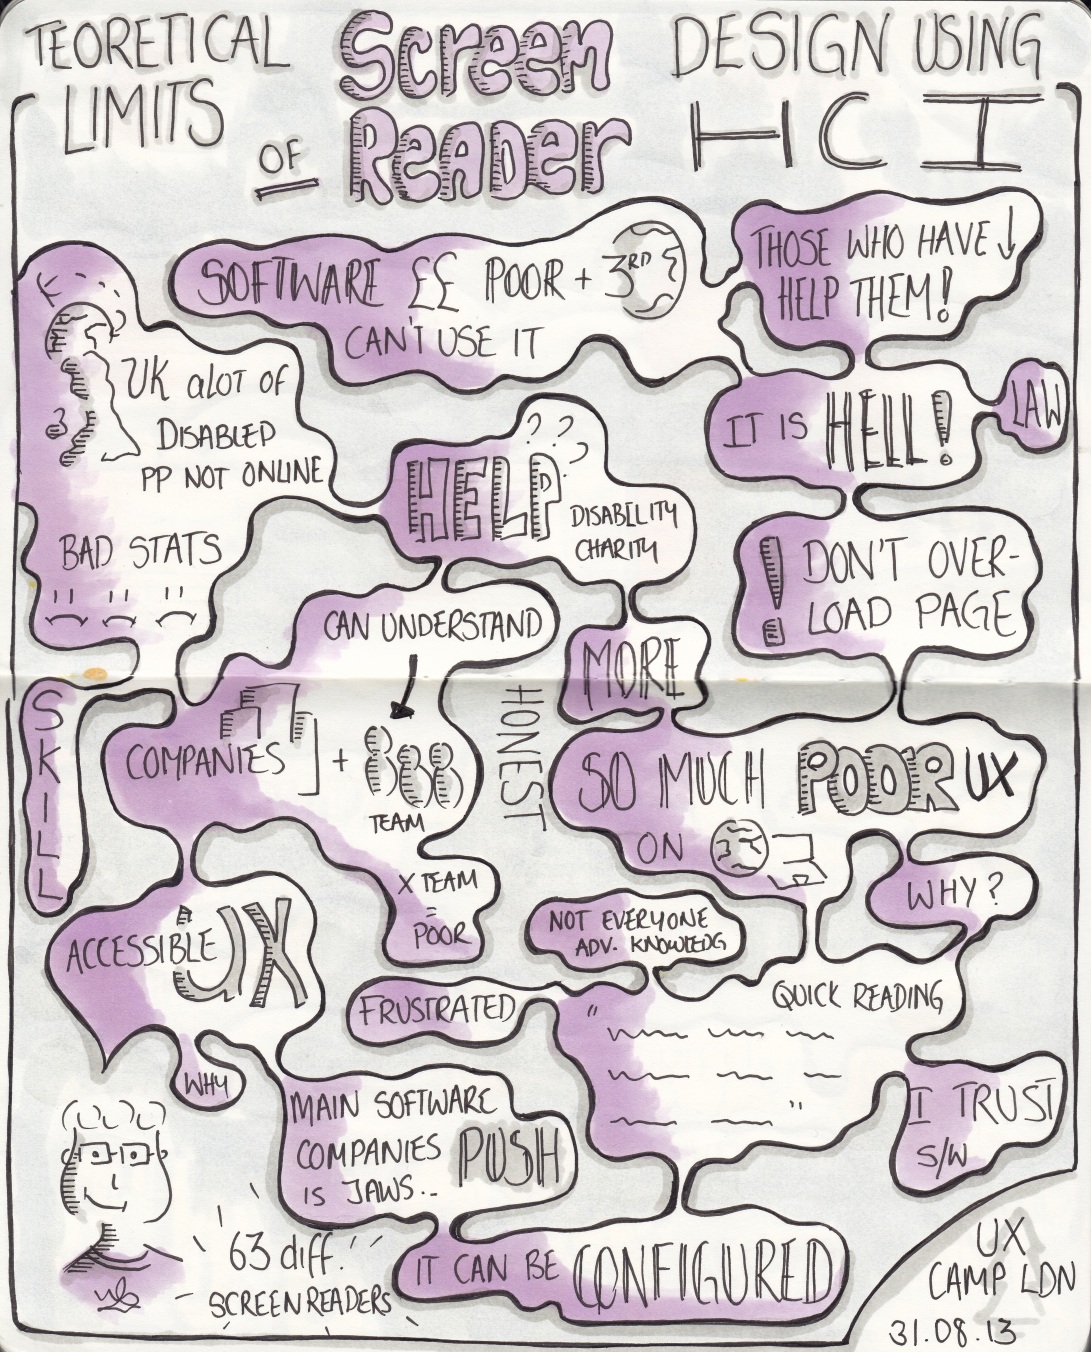 Sketchnotes from UXCL13 "Theoretical limits of screen reader design in HCI"